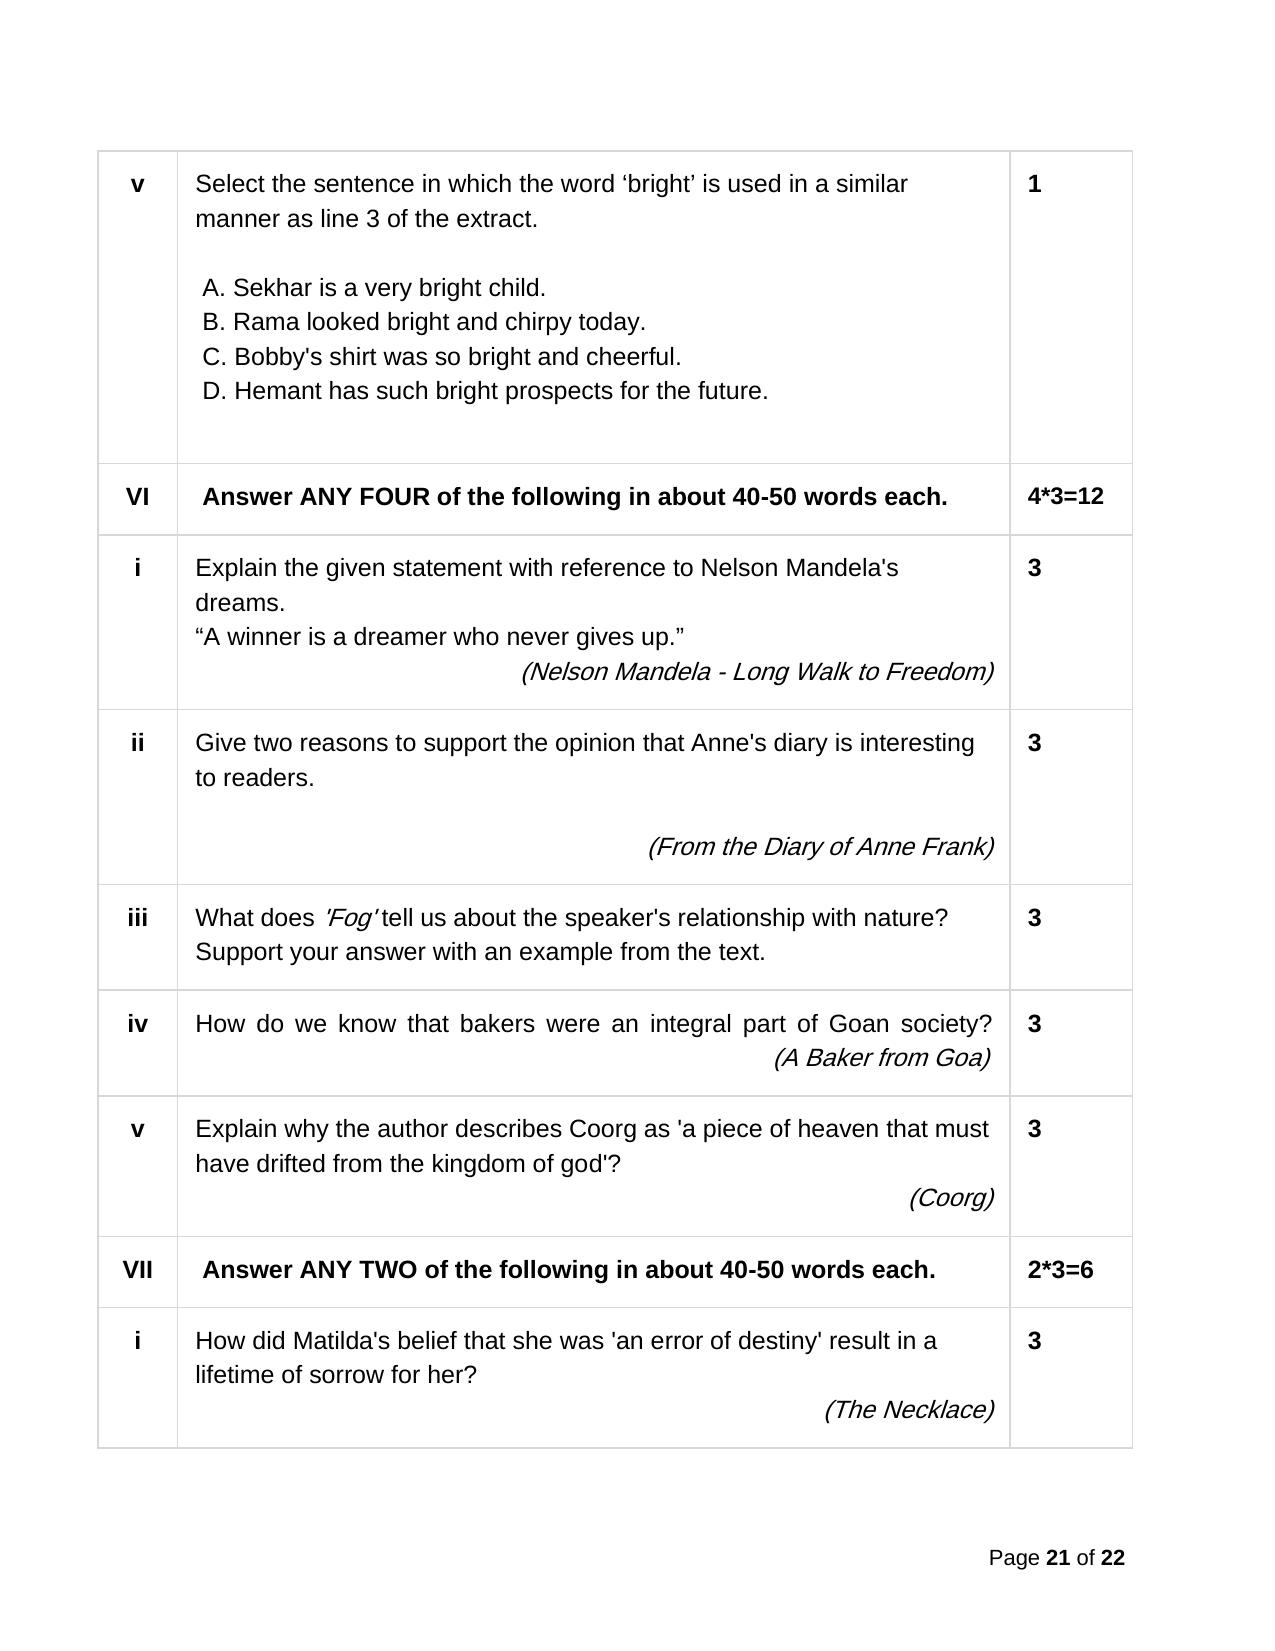 CBSE Class 10 English Practice Questions 2022-23 - Page 21